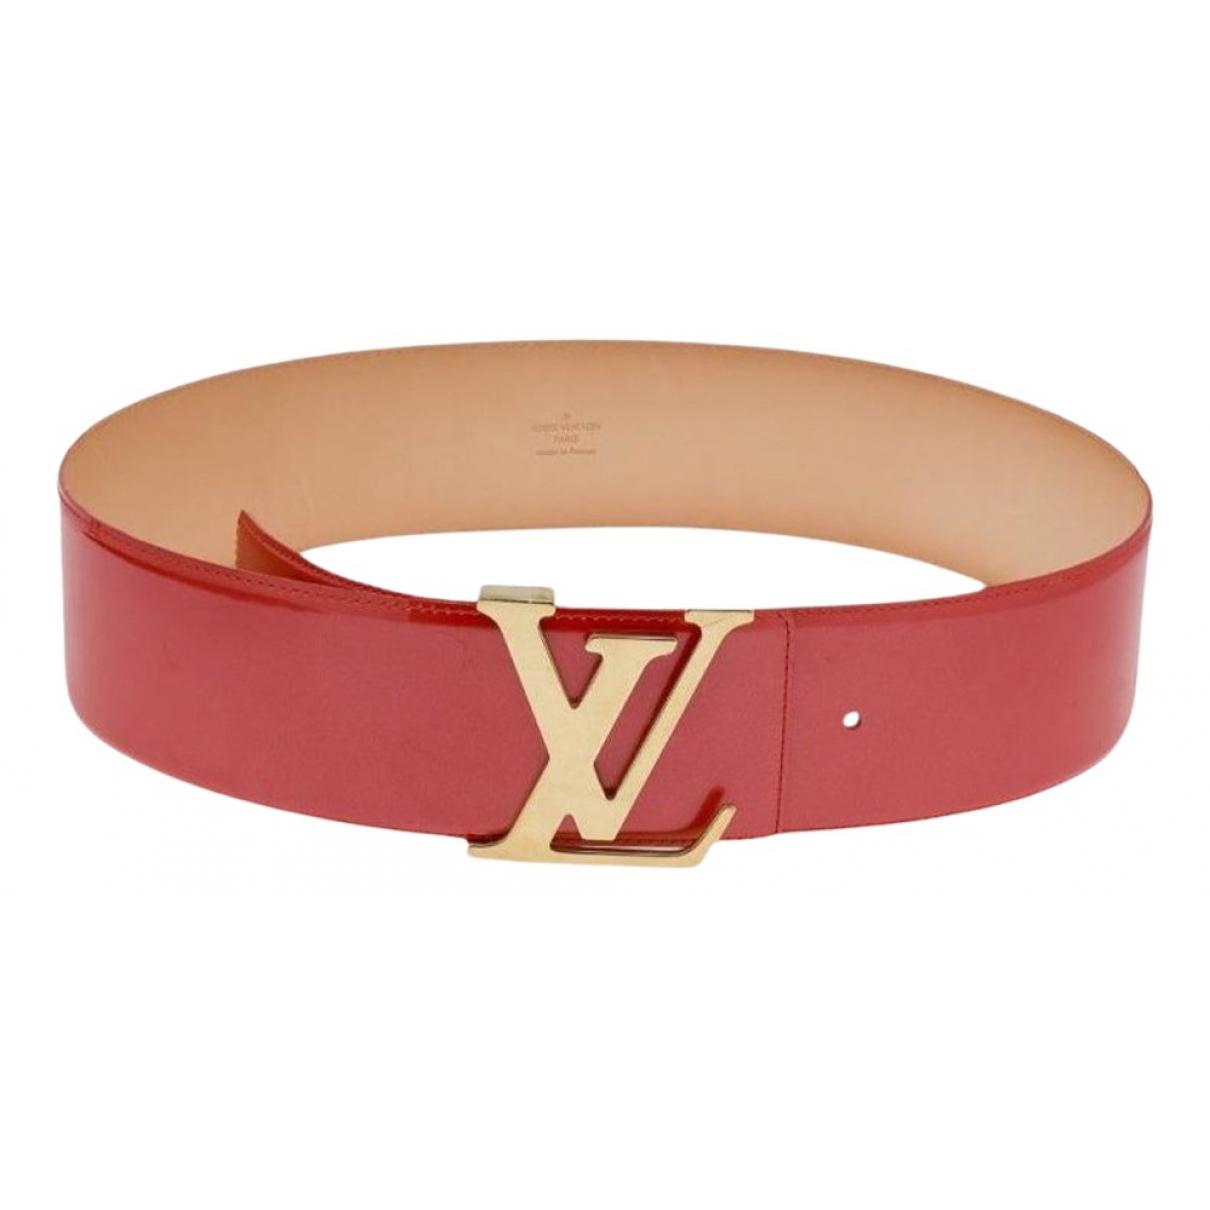 Initiales leather belt Louis Vuitton Black size XS International in Leather  - 37139007